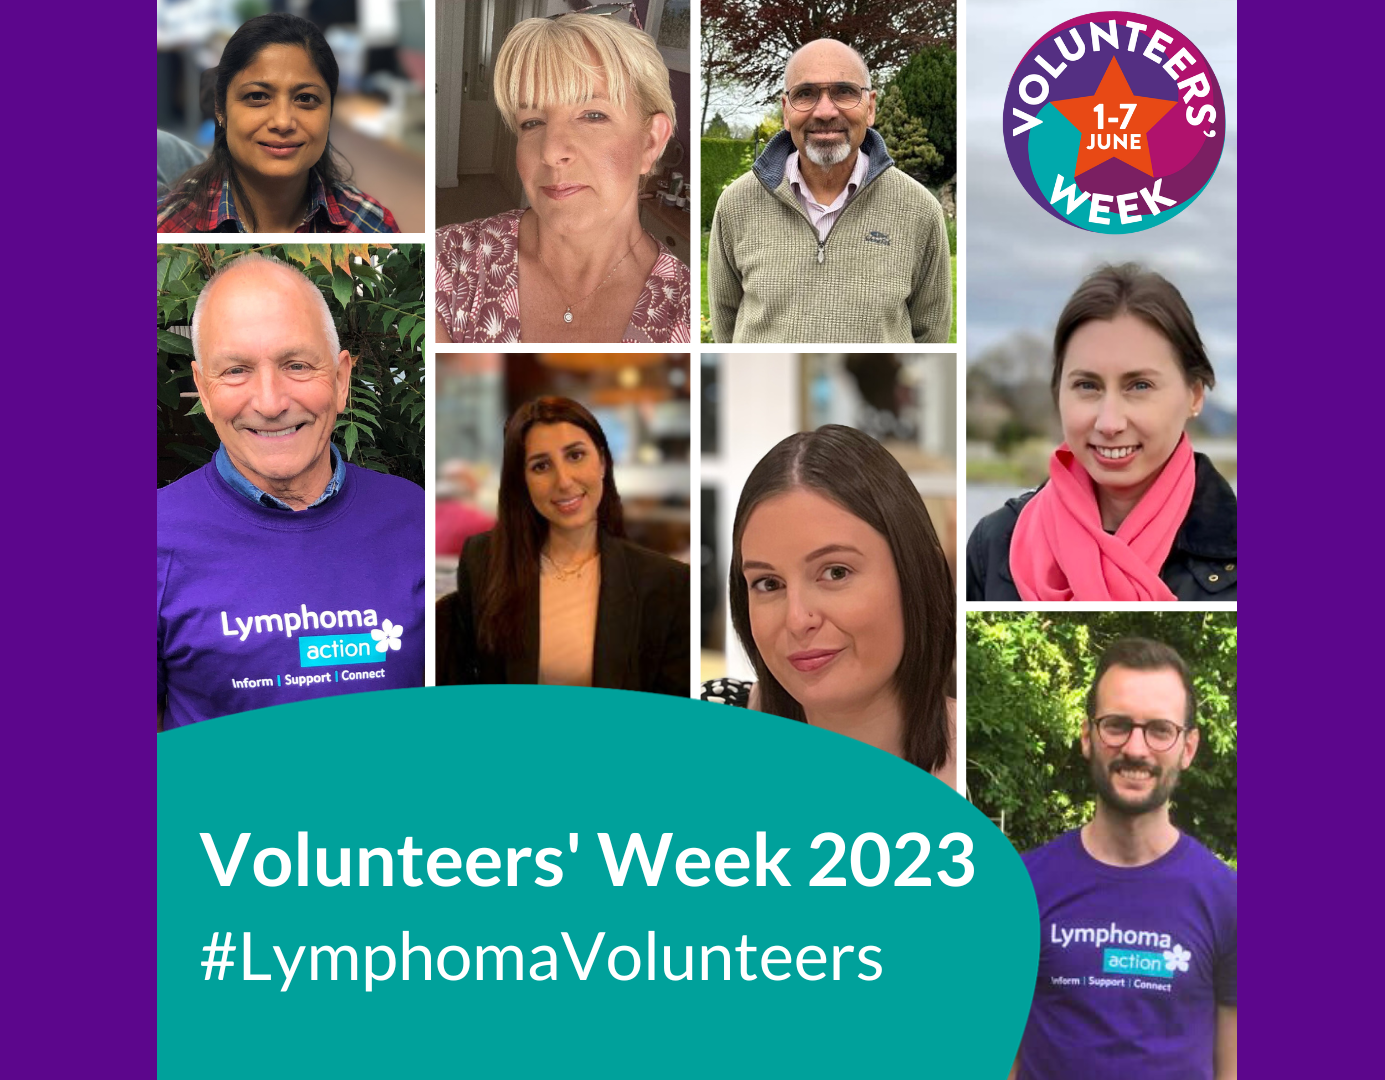 Group of Lymphoma Action Volunteers with text to support volunteers' week 2023